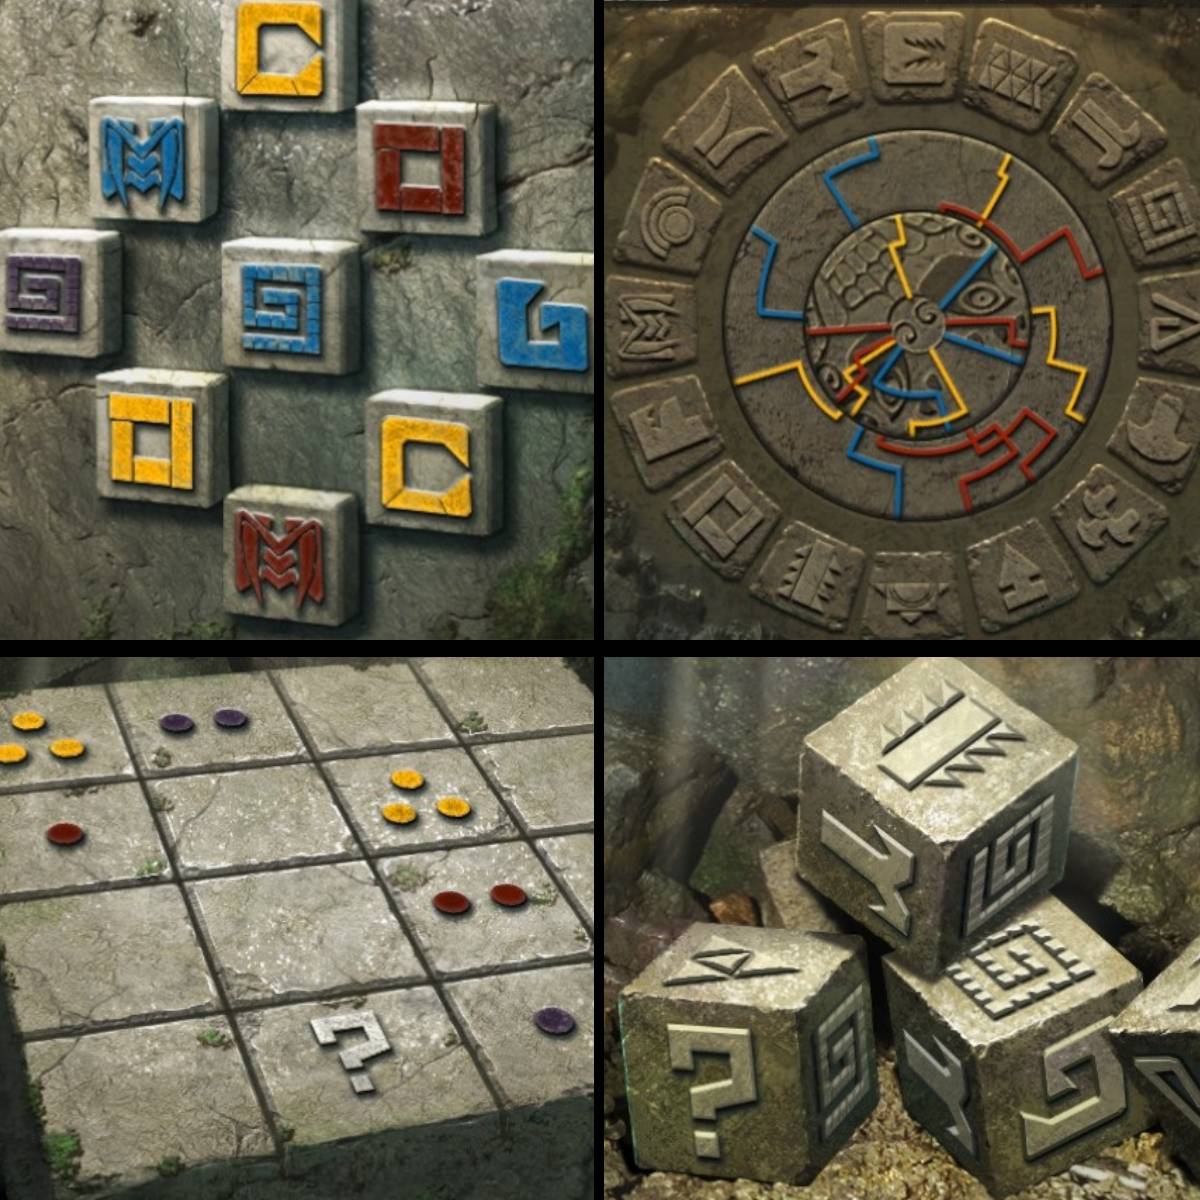 Puzzle Guide: How to Solve All Puzzles